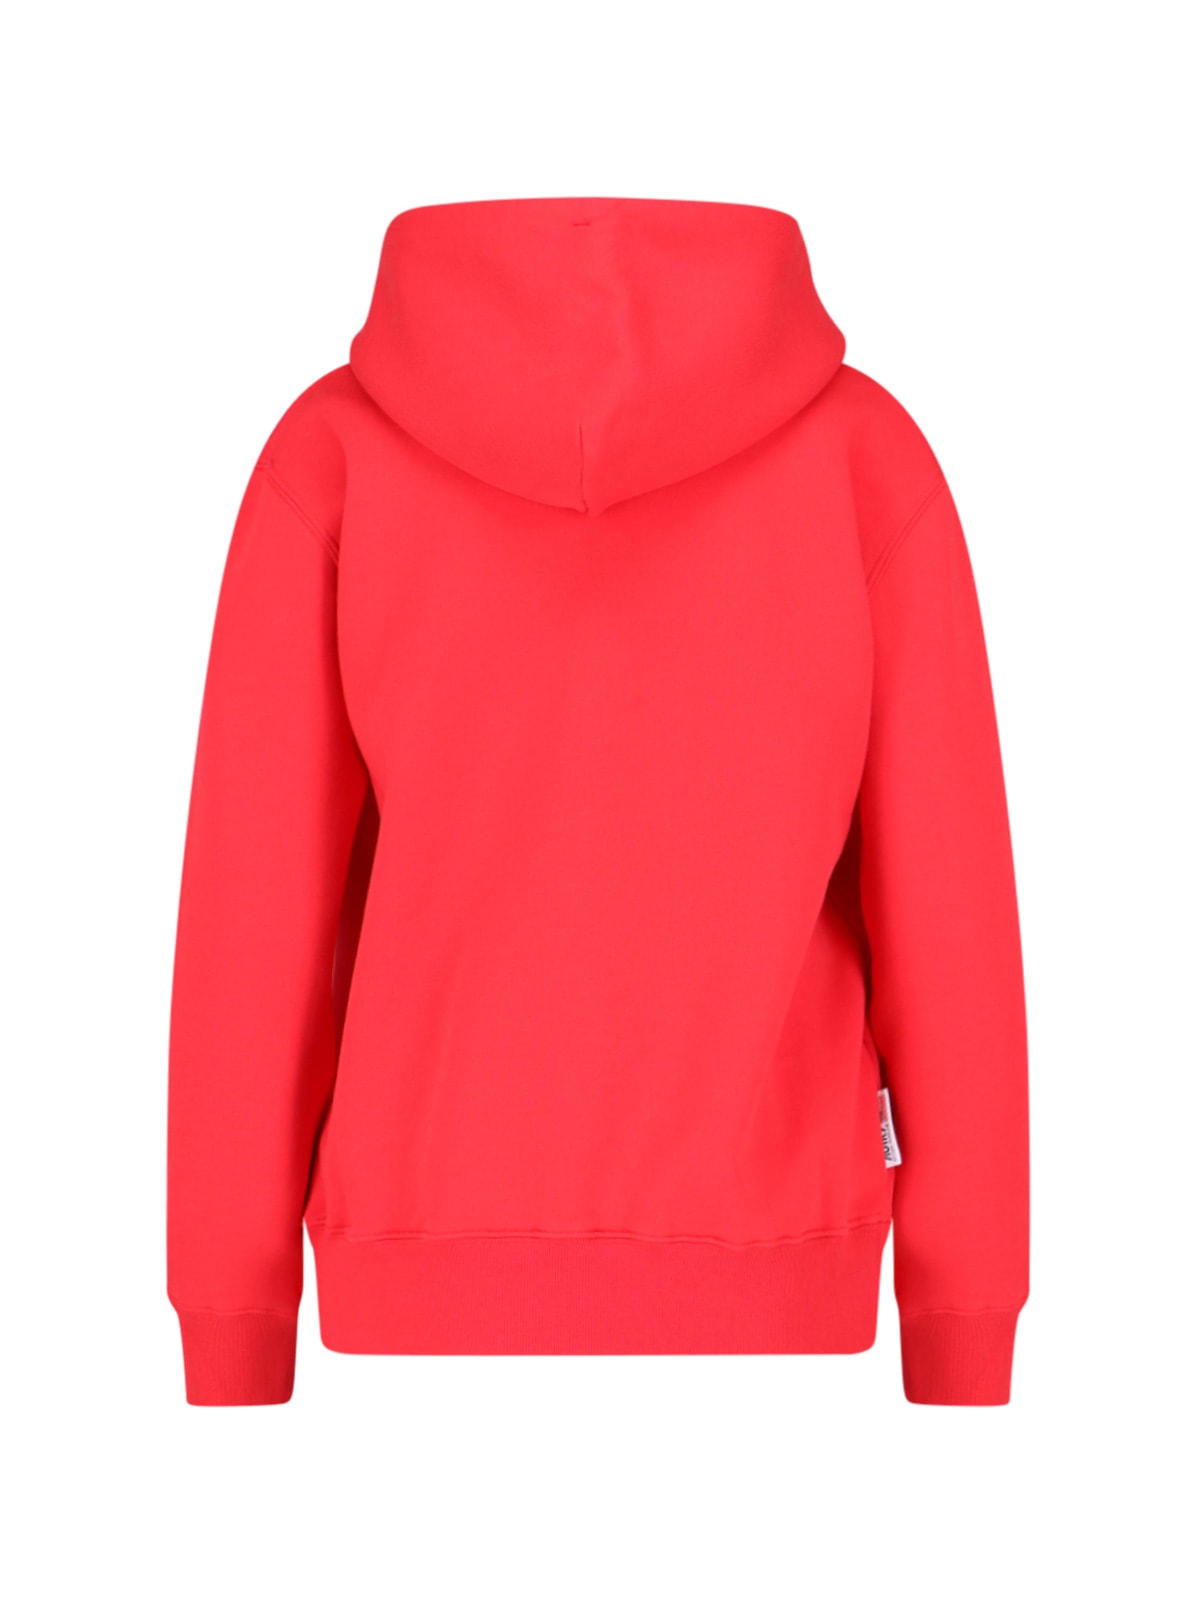 Shop Autry Logo Hoodie In Red